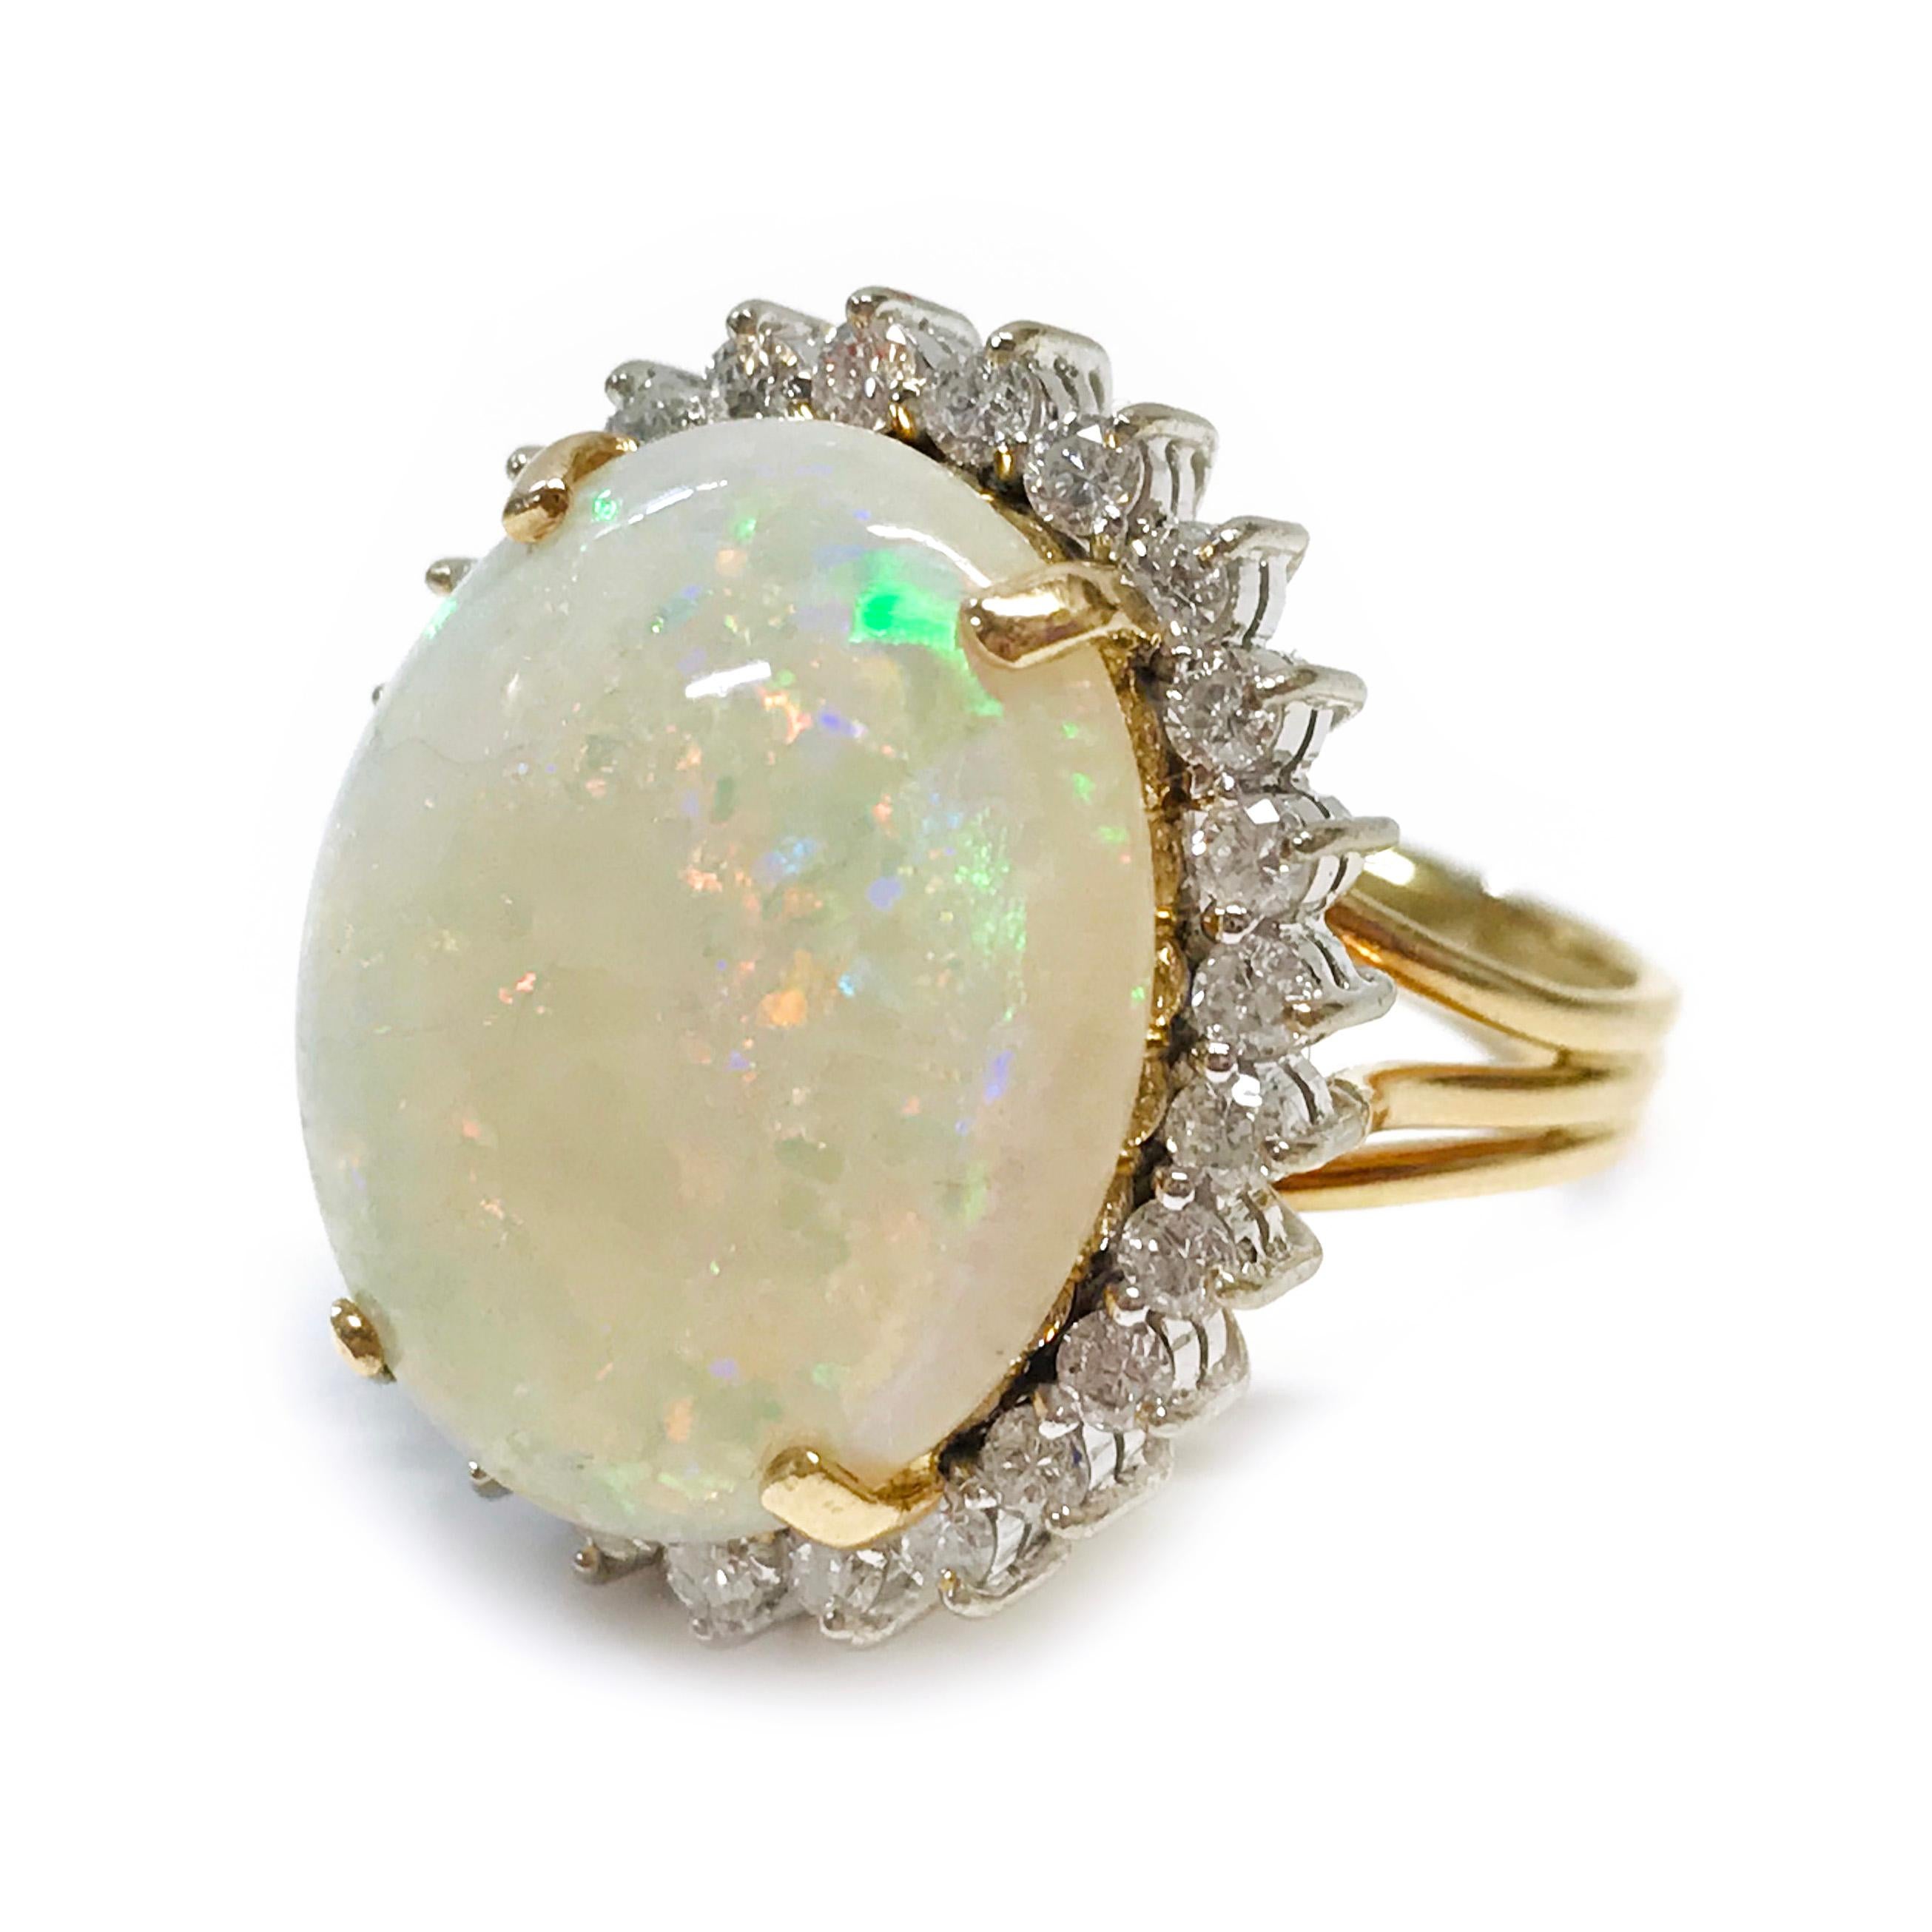 14 Karat Australian Opal Cocktail Ring with a Diamond Halo. The split band adds elegance and detail to the ring and compliments the 10.28ct Opal. The Opal cabochon measures 19 x 15.5mm and has beautiful variations of red, green, and purple colors.